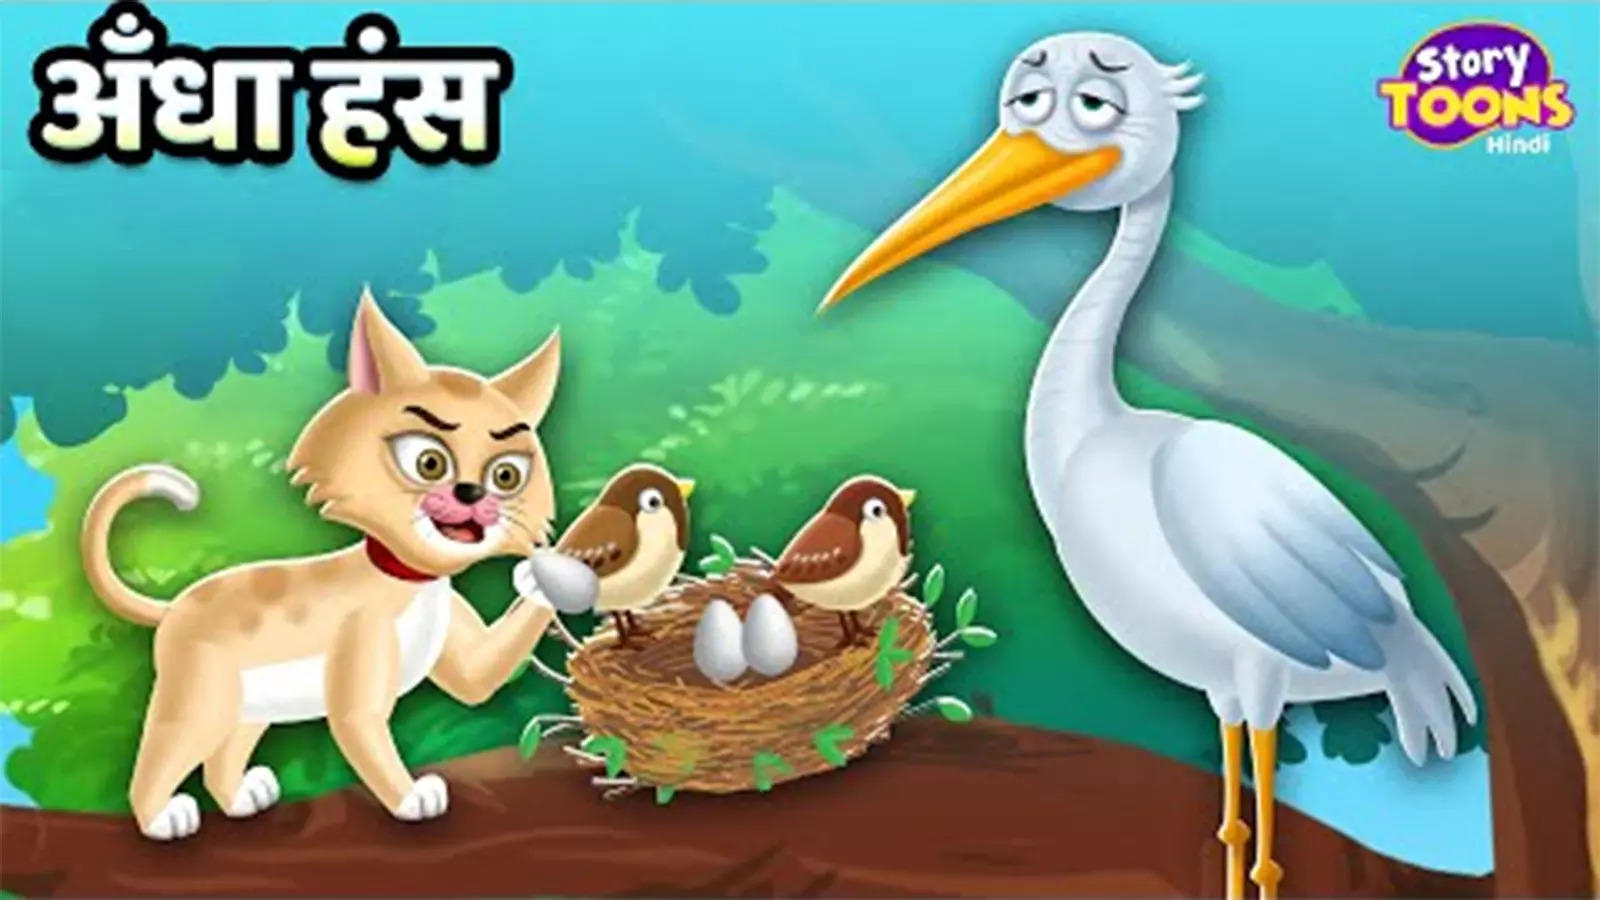 Watch Latest Children Hindi Story 'Blind Stork' For Kids - Check Out Kids's  Nursery Rhymes And Baby Songs In Hindi | Entertainment - Times of India  Videos